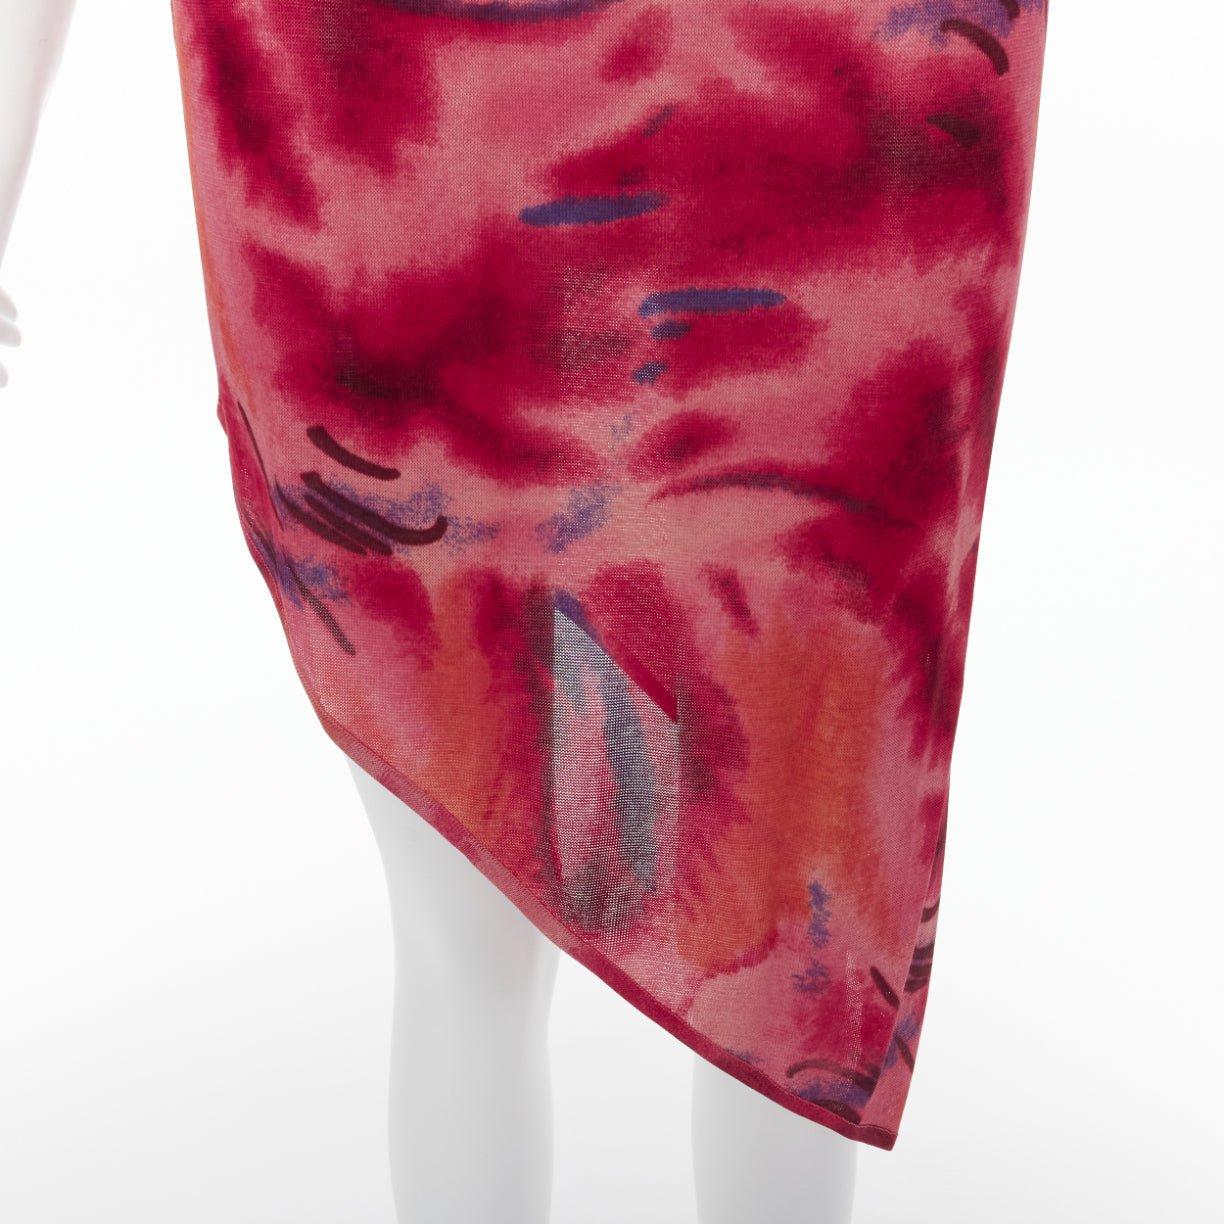 CHRISTIAN DIOR John Galliano Vintage red abstract print asymmetric hem slip dress FR38 M
Reference: TGAS/D00401
Brand: Christian Dior
Designer: John Galliano
Material: Viscose
Color: Red, Purple
Pattern: Abstract
Closure: Slip On
Extra Details: